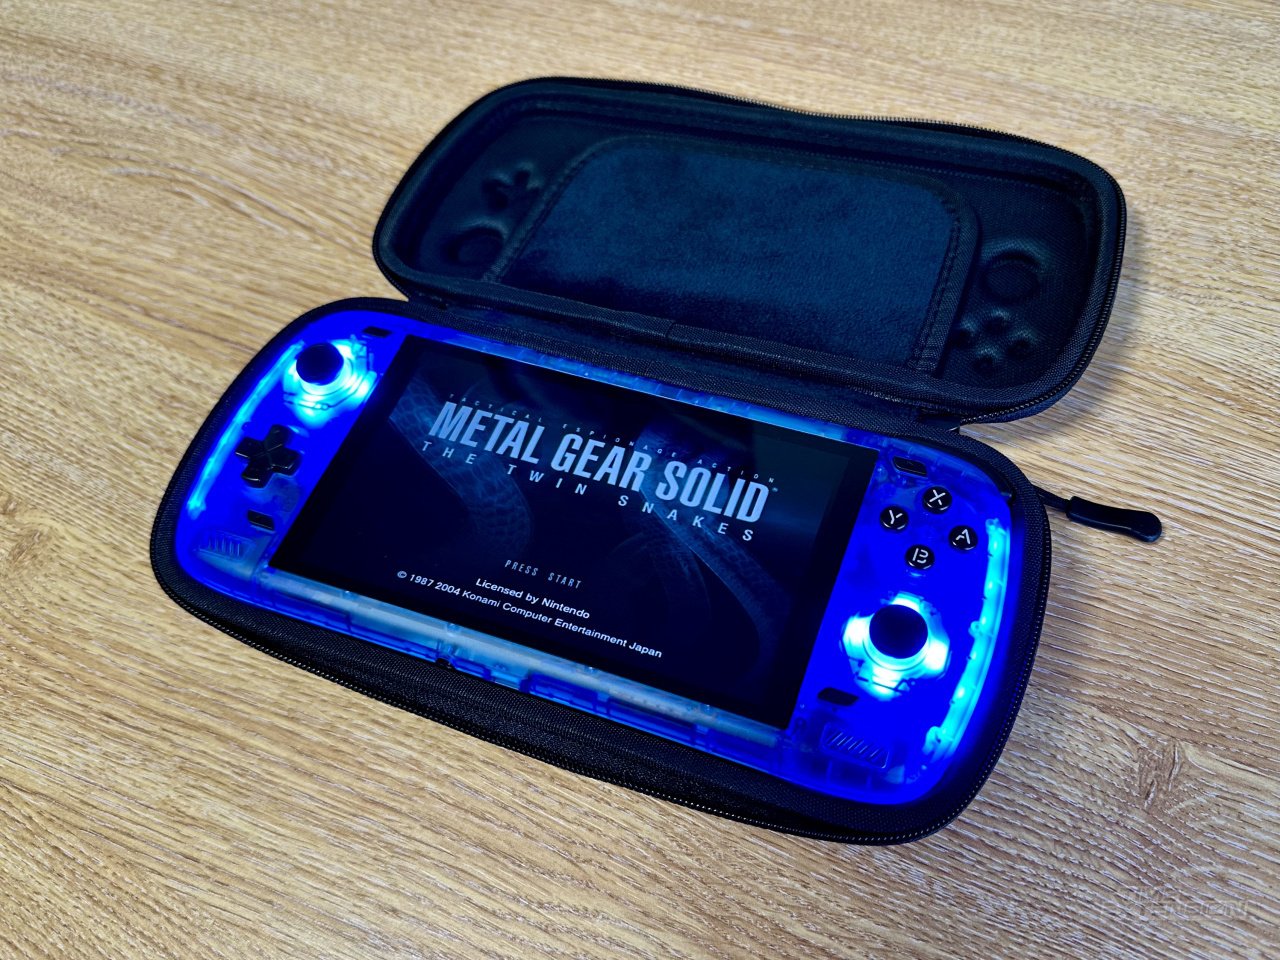 Ayn Odin review: The most comprehensive retro handheld yet